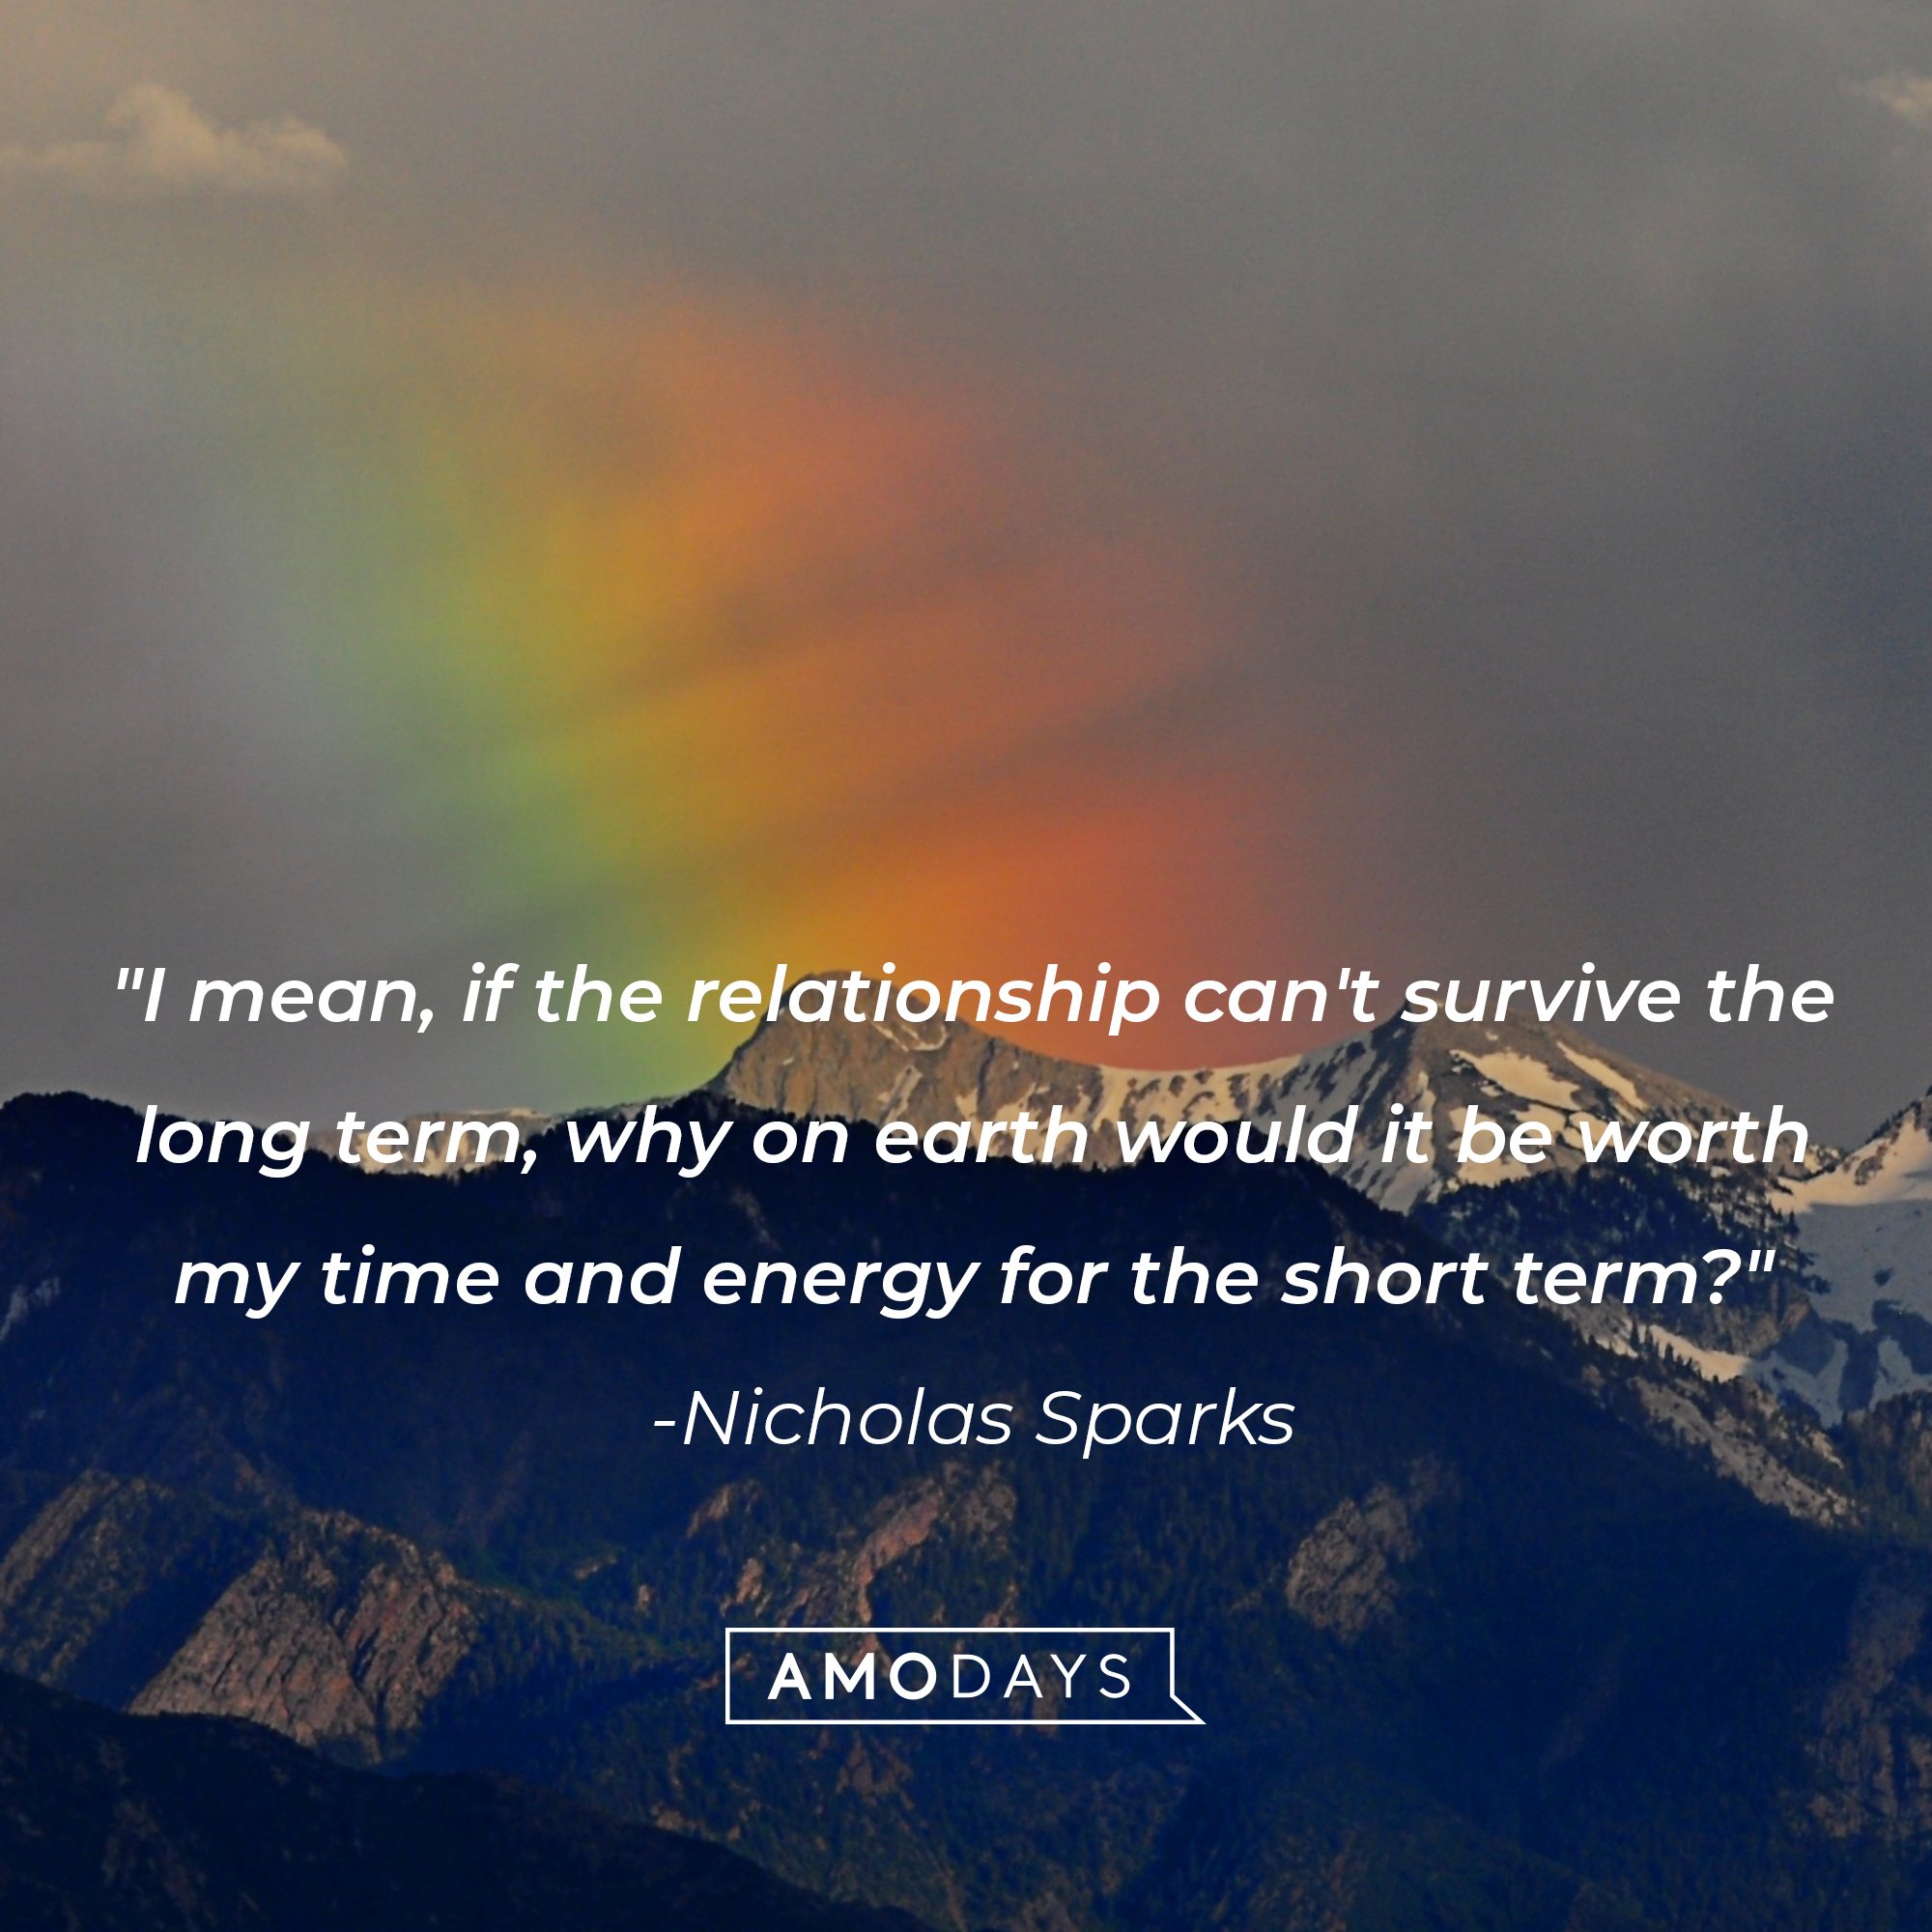 Nicholas Sparks’ quote: "I mean, if the relationship can't survive the long term, why on earth would it be worth my time and energy for the short term?" | Image: AmoDays 